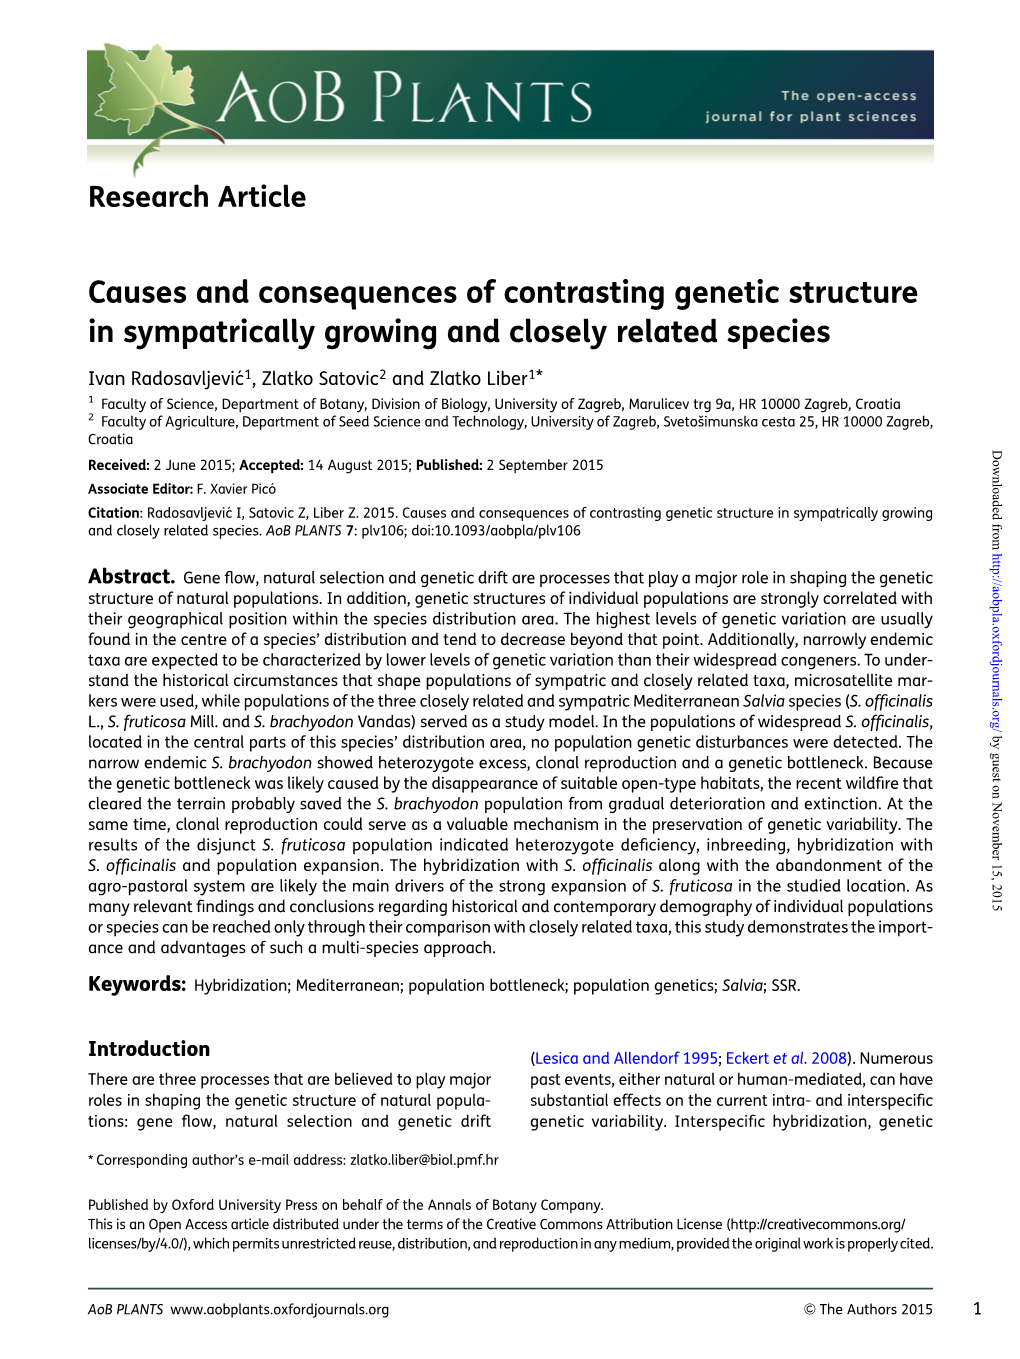 Causes and Consequences of Contrasting Genetic Structure in Sympatrically Growing and Closely Related Species